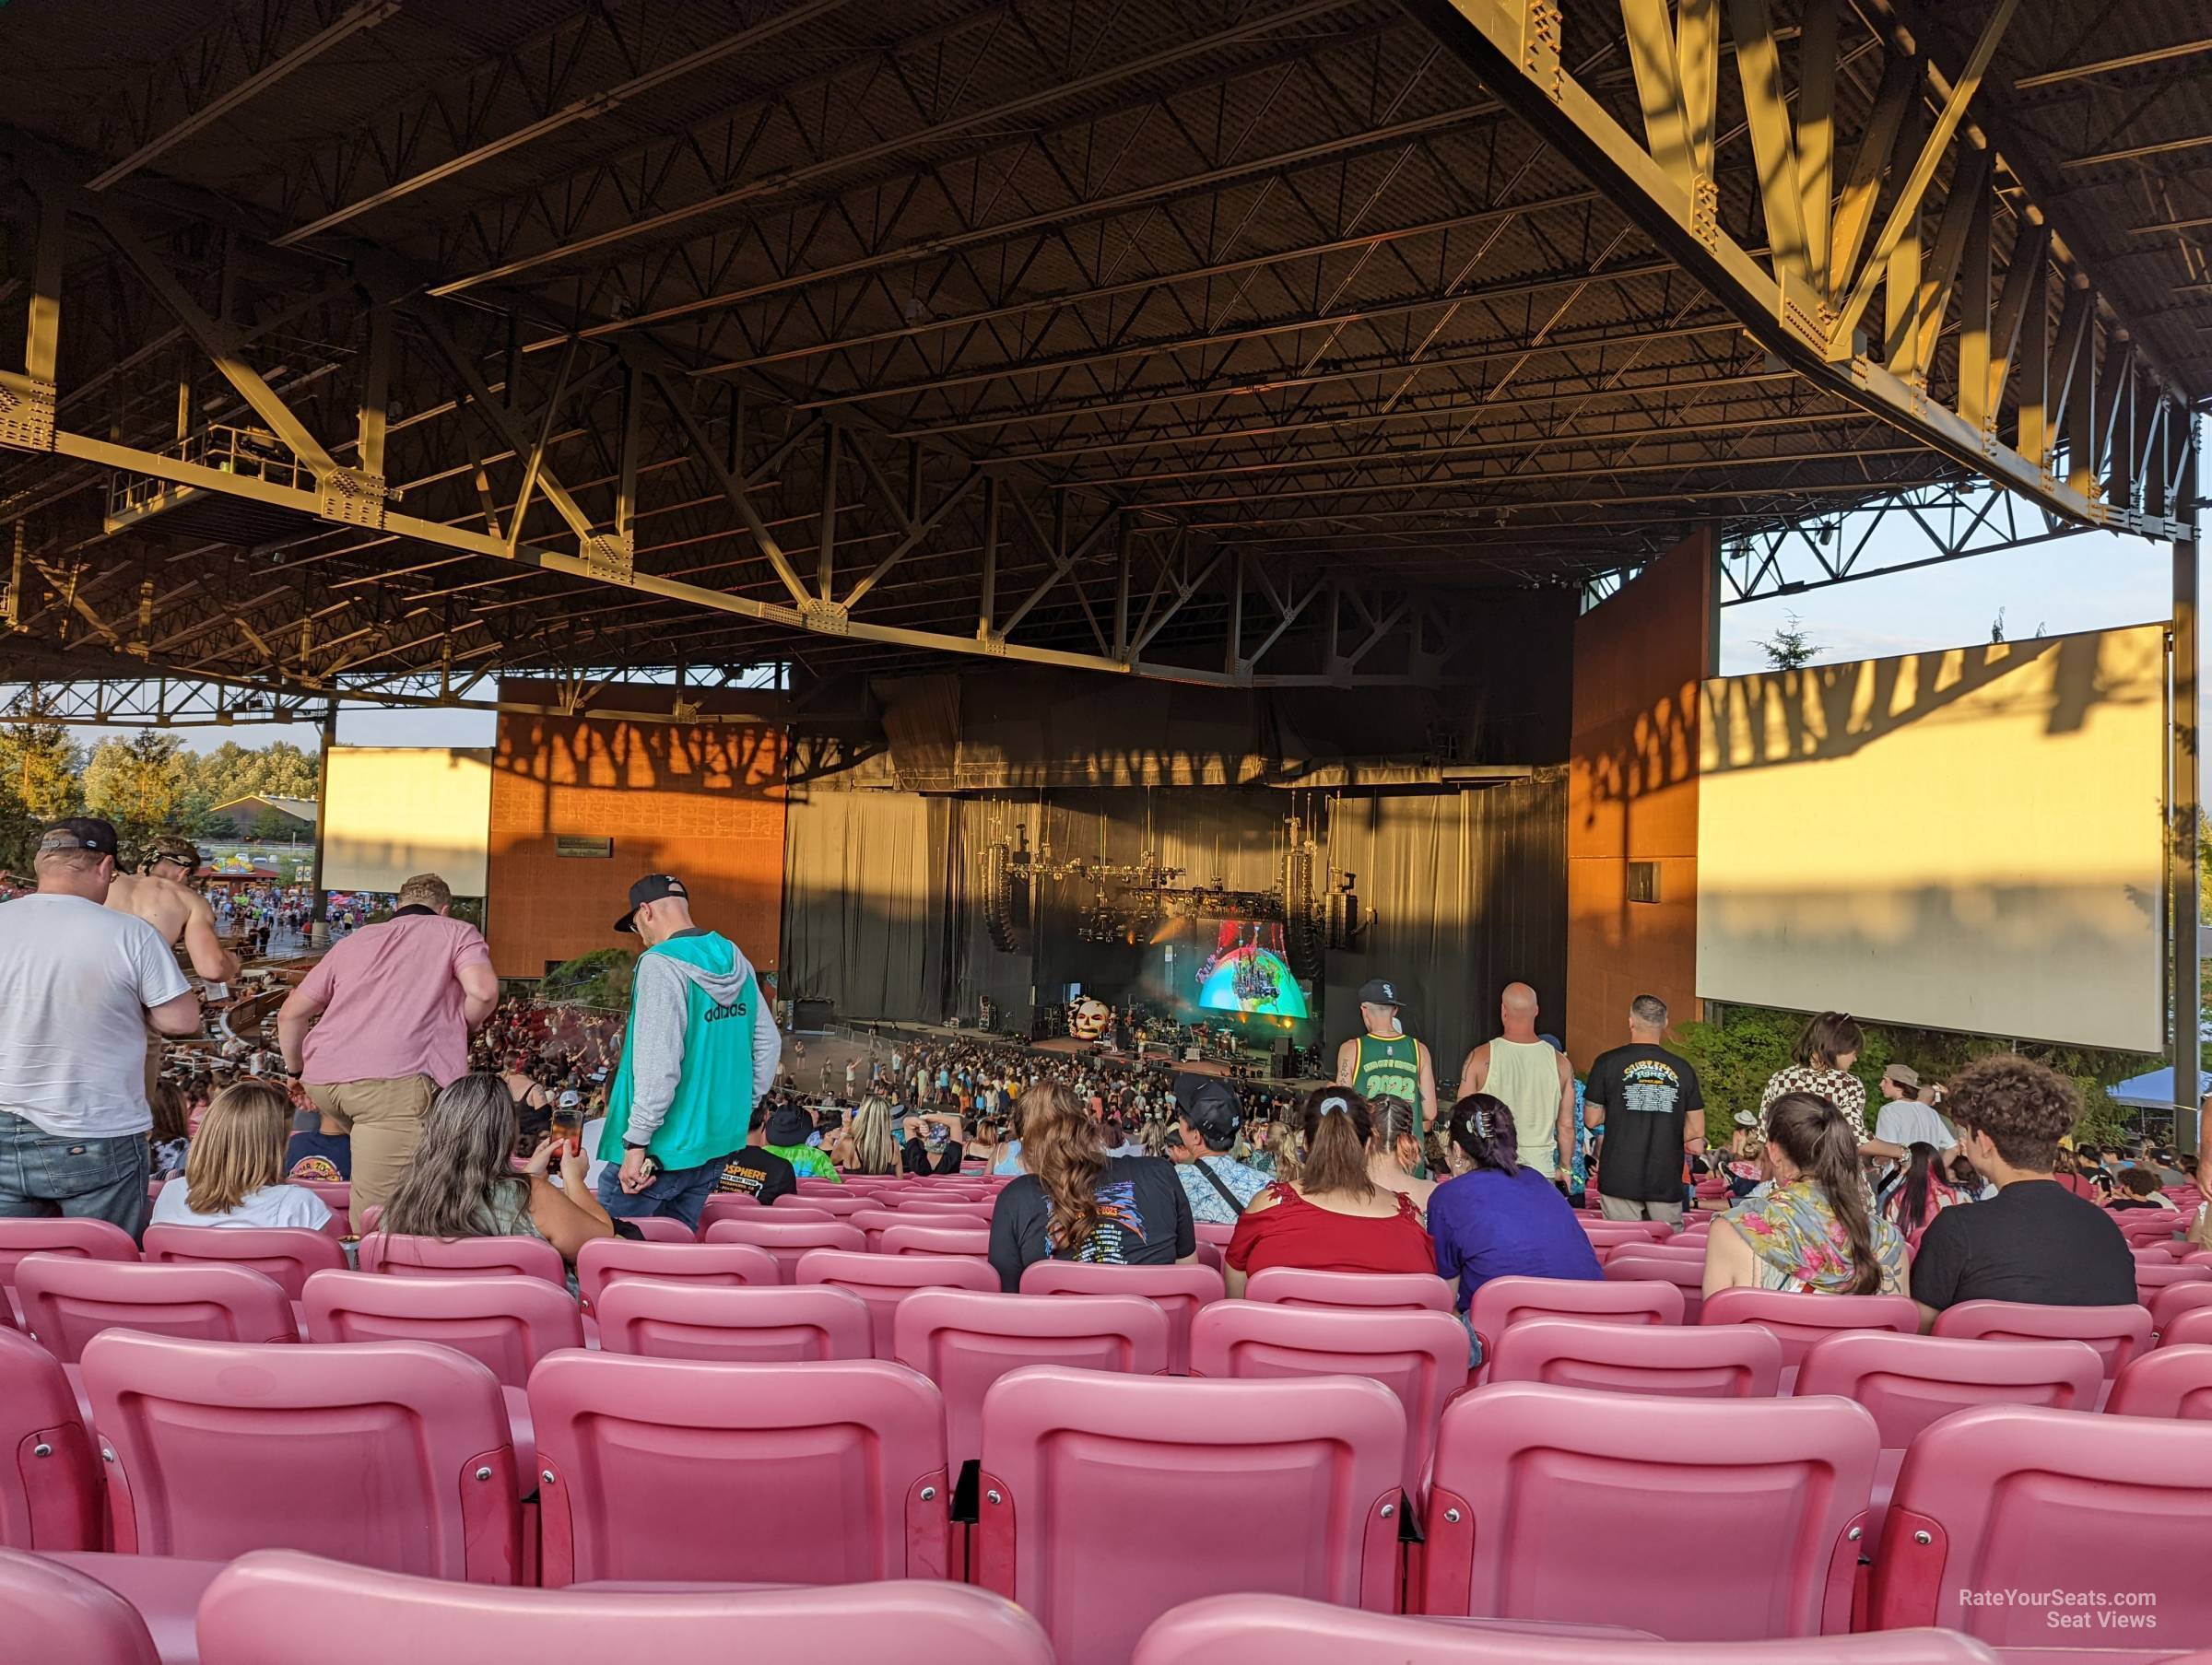 section 202, row 32 seat view  - white river amphitheatre